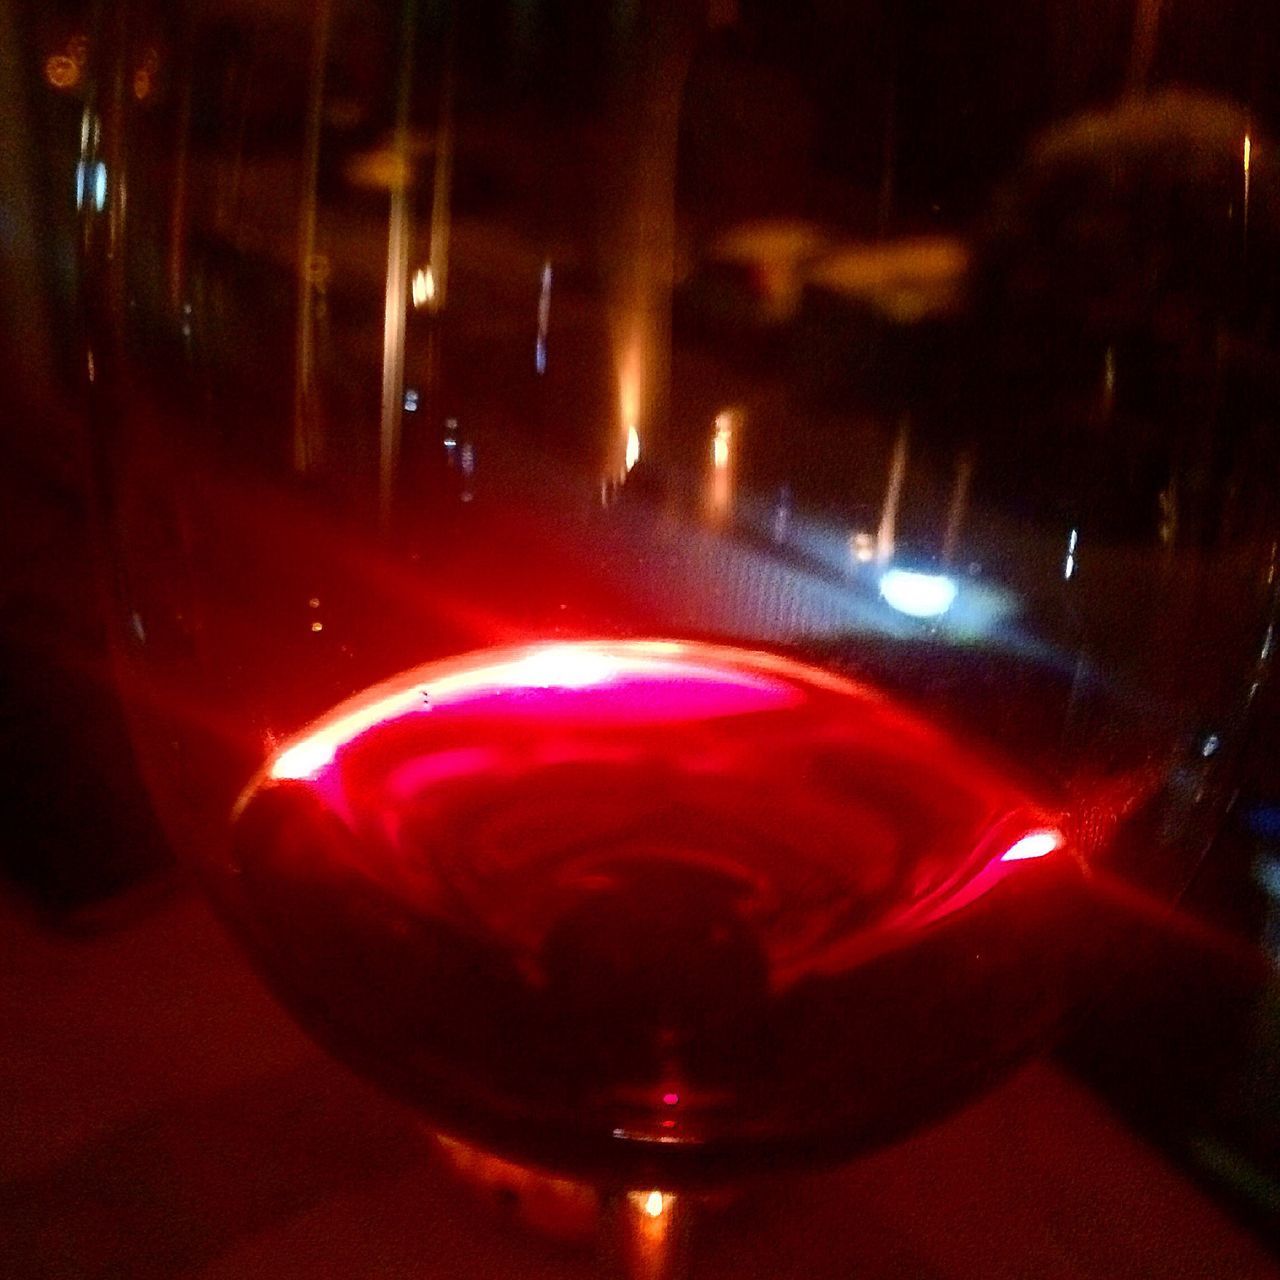 drink, illuminated, refreshment, food and drink, alcohol, close-up, wineglass, wine, red wine, red, night, focus on foreground, glowing, dark, nightlife, electric light, multi colored, freshness, wine glass